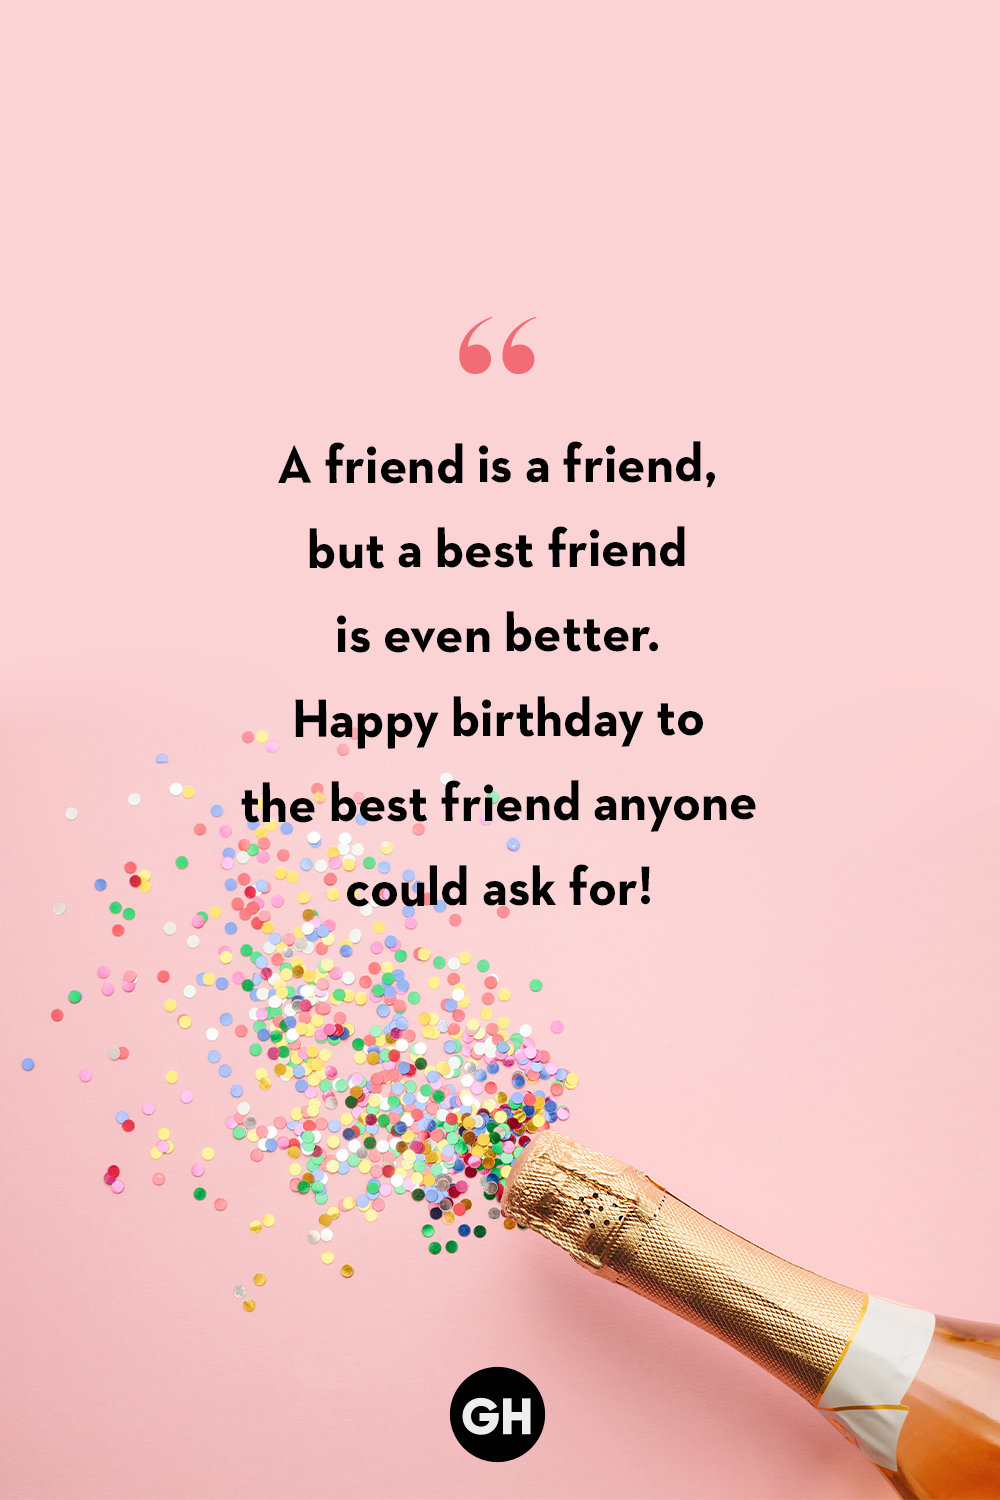 Cute birthday wishes for best friends